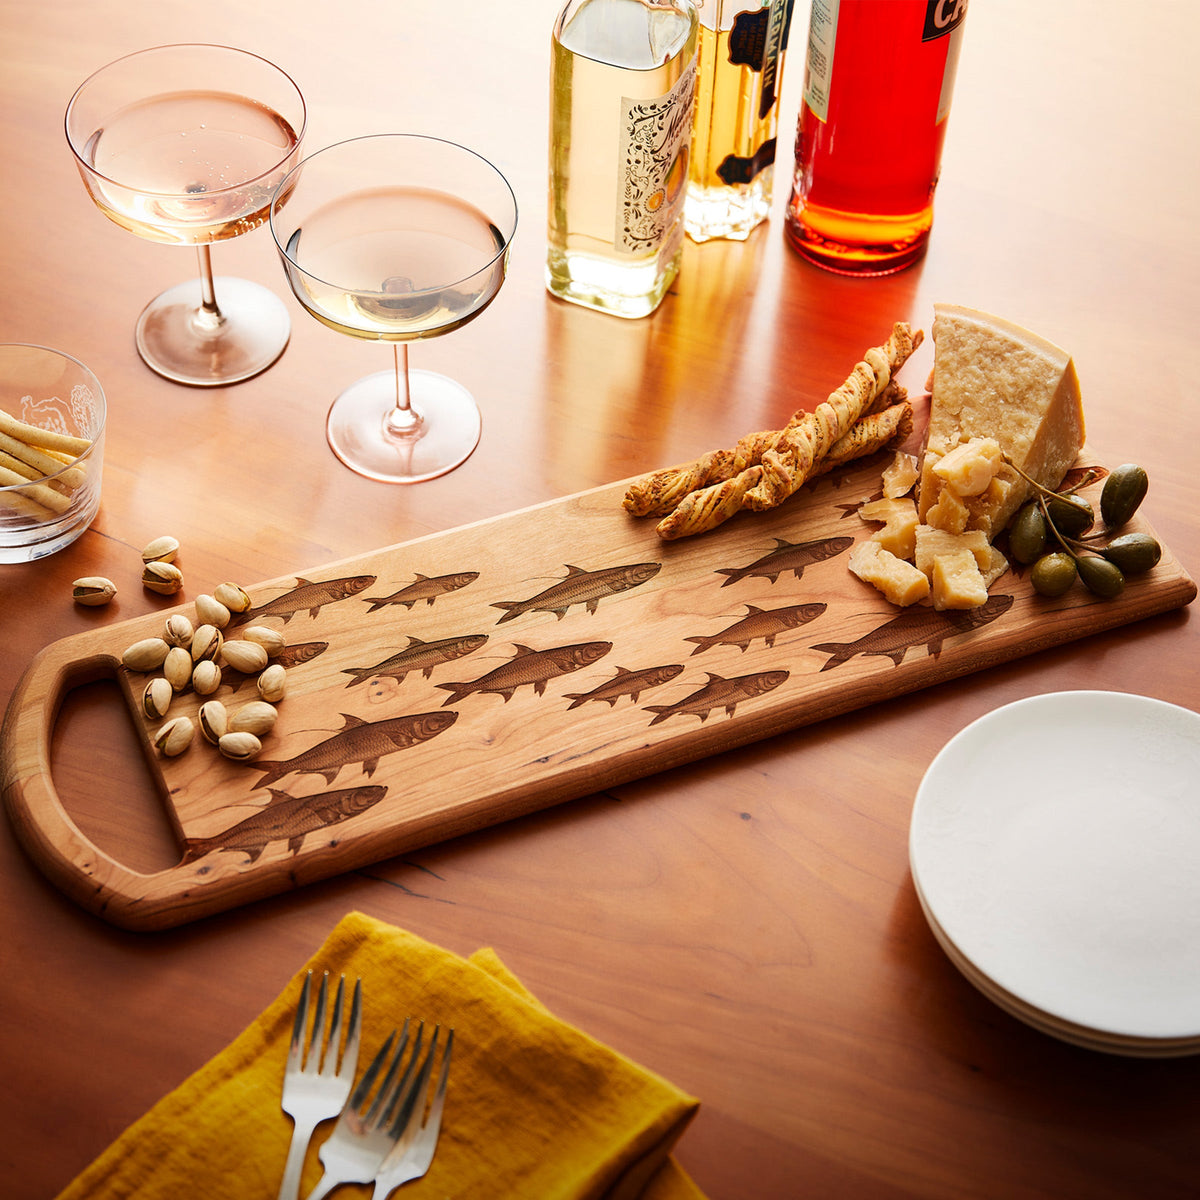 A Caskata School of Fish Serving Board crafted from cherry wood, featuring a delightful fish motif.